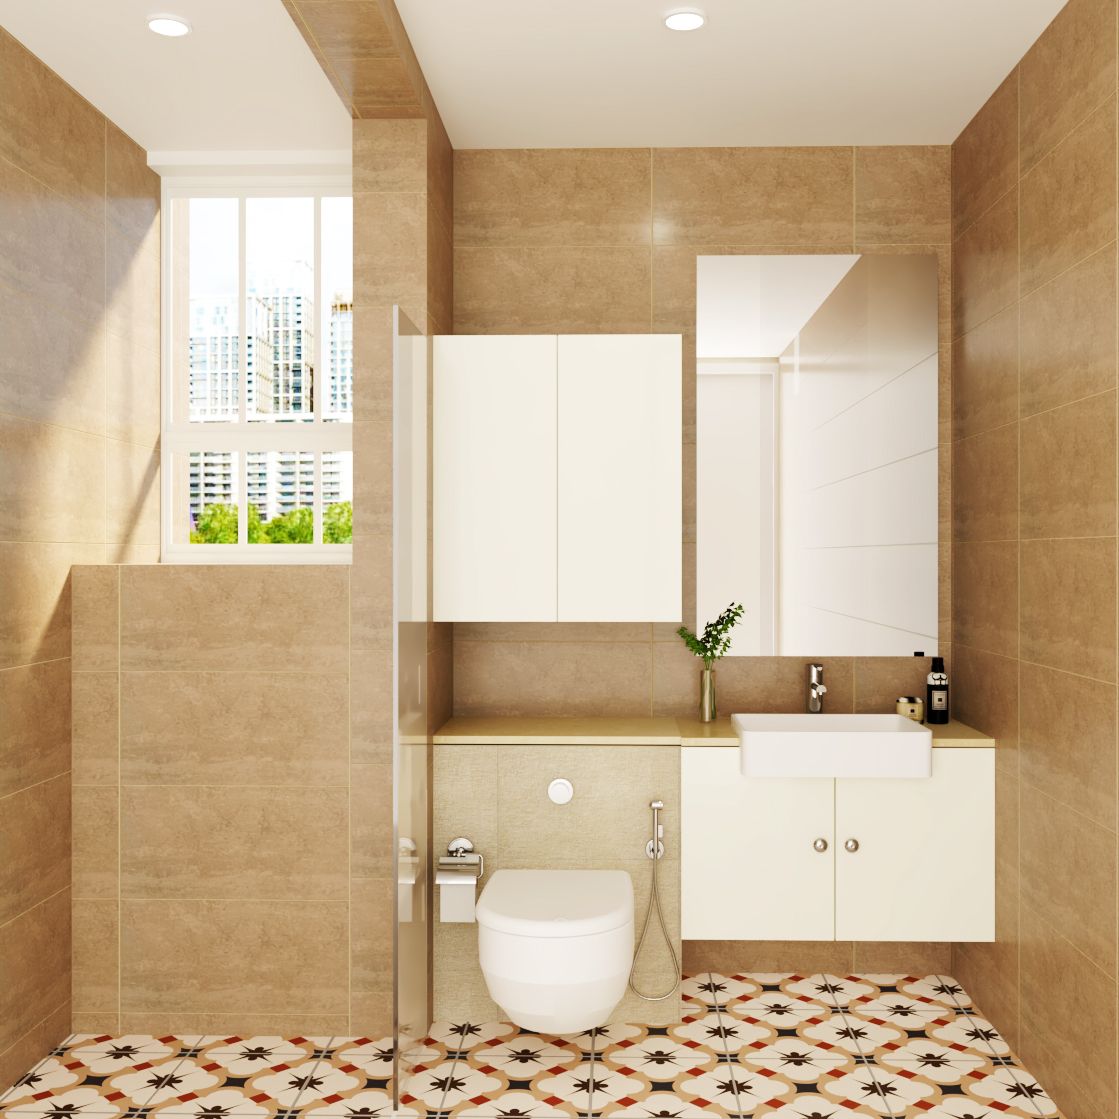 Classic Brown-Toned BathroomDesign With Smart Space-Saving Storage